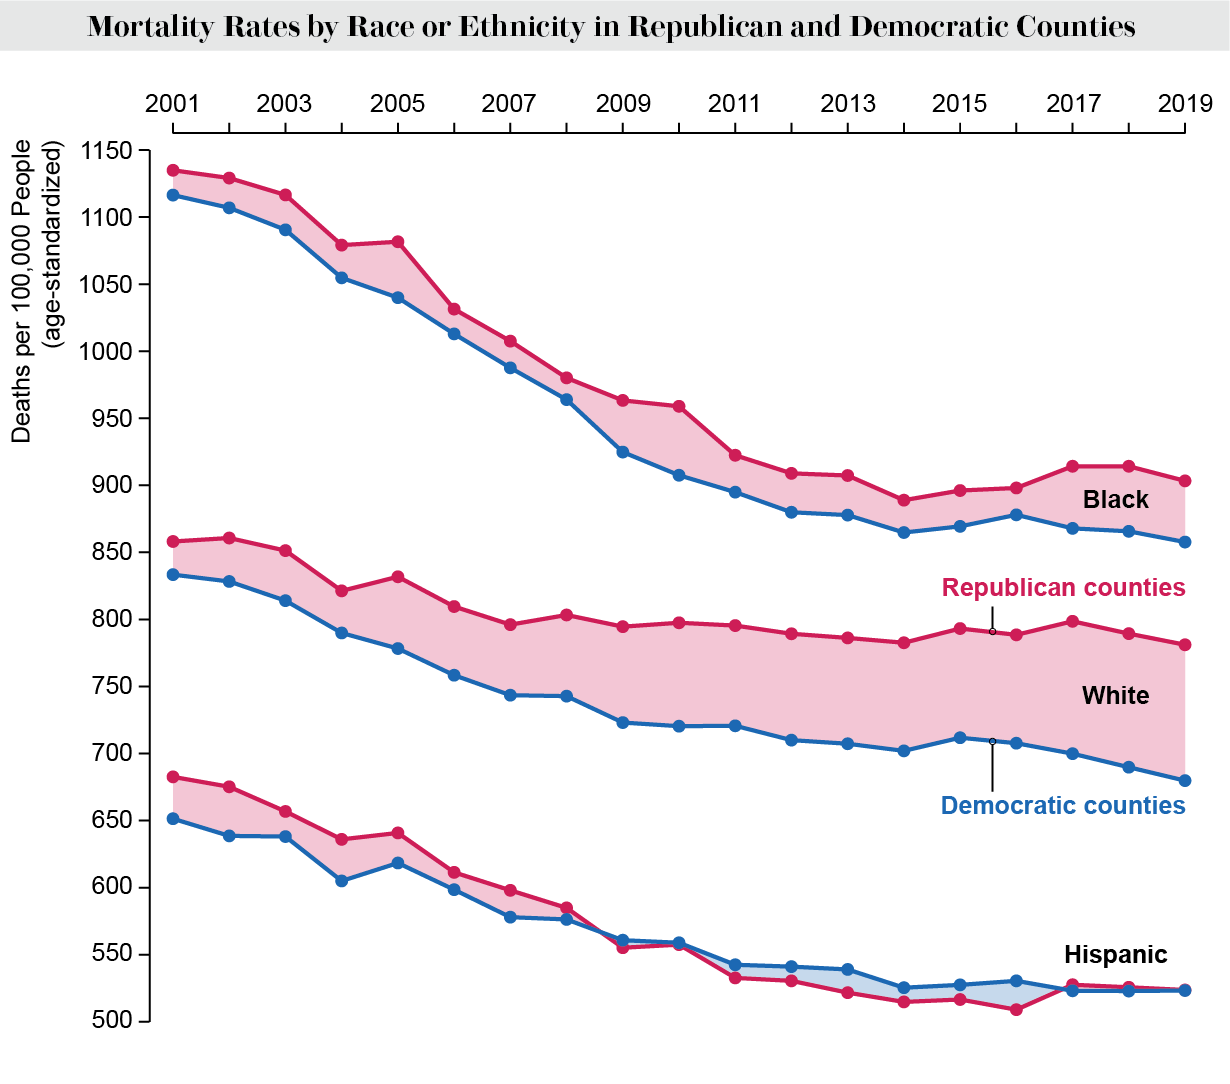 Line chart shows death rates by race or ethnicity in U.S. Republican and Democratic counties from 2001 to 2019.